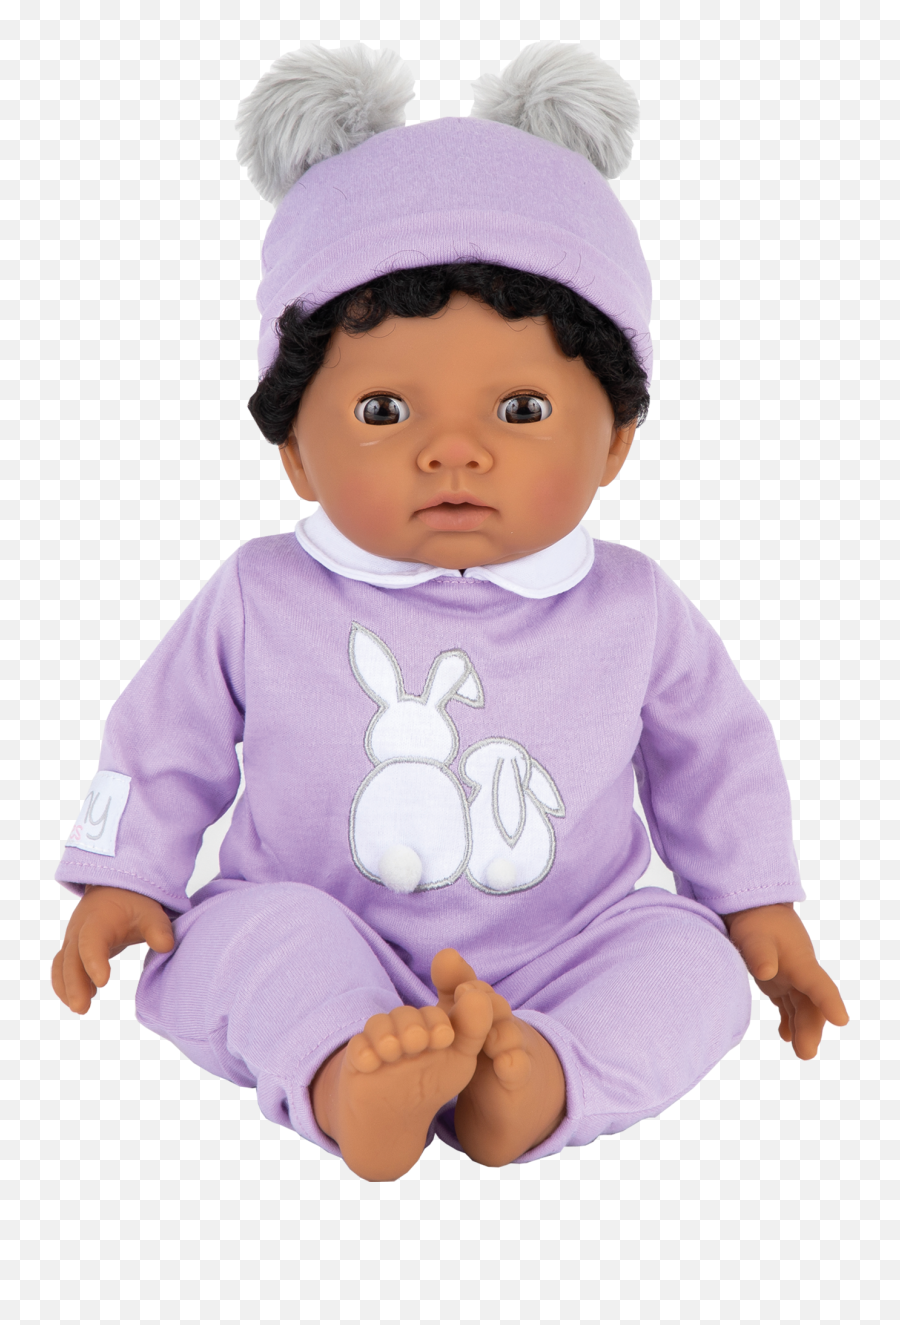 Dolls Tiny Treasures - Tiny Treasures Doll With Purple Outfit Emoji,Lifelike Doll Showing Emotions